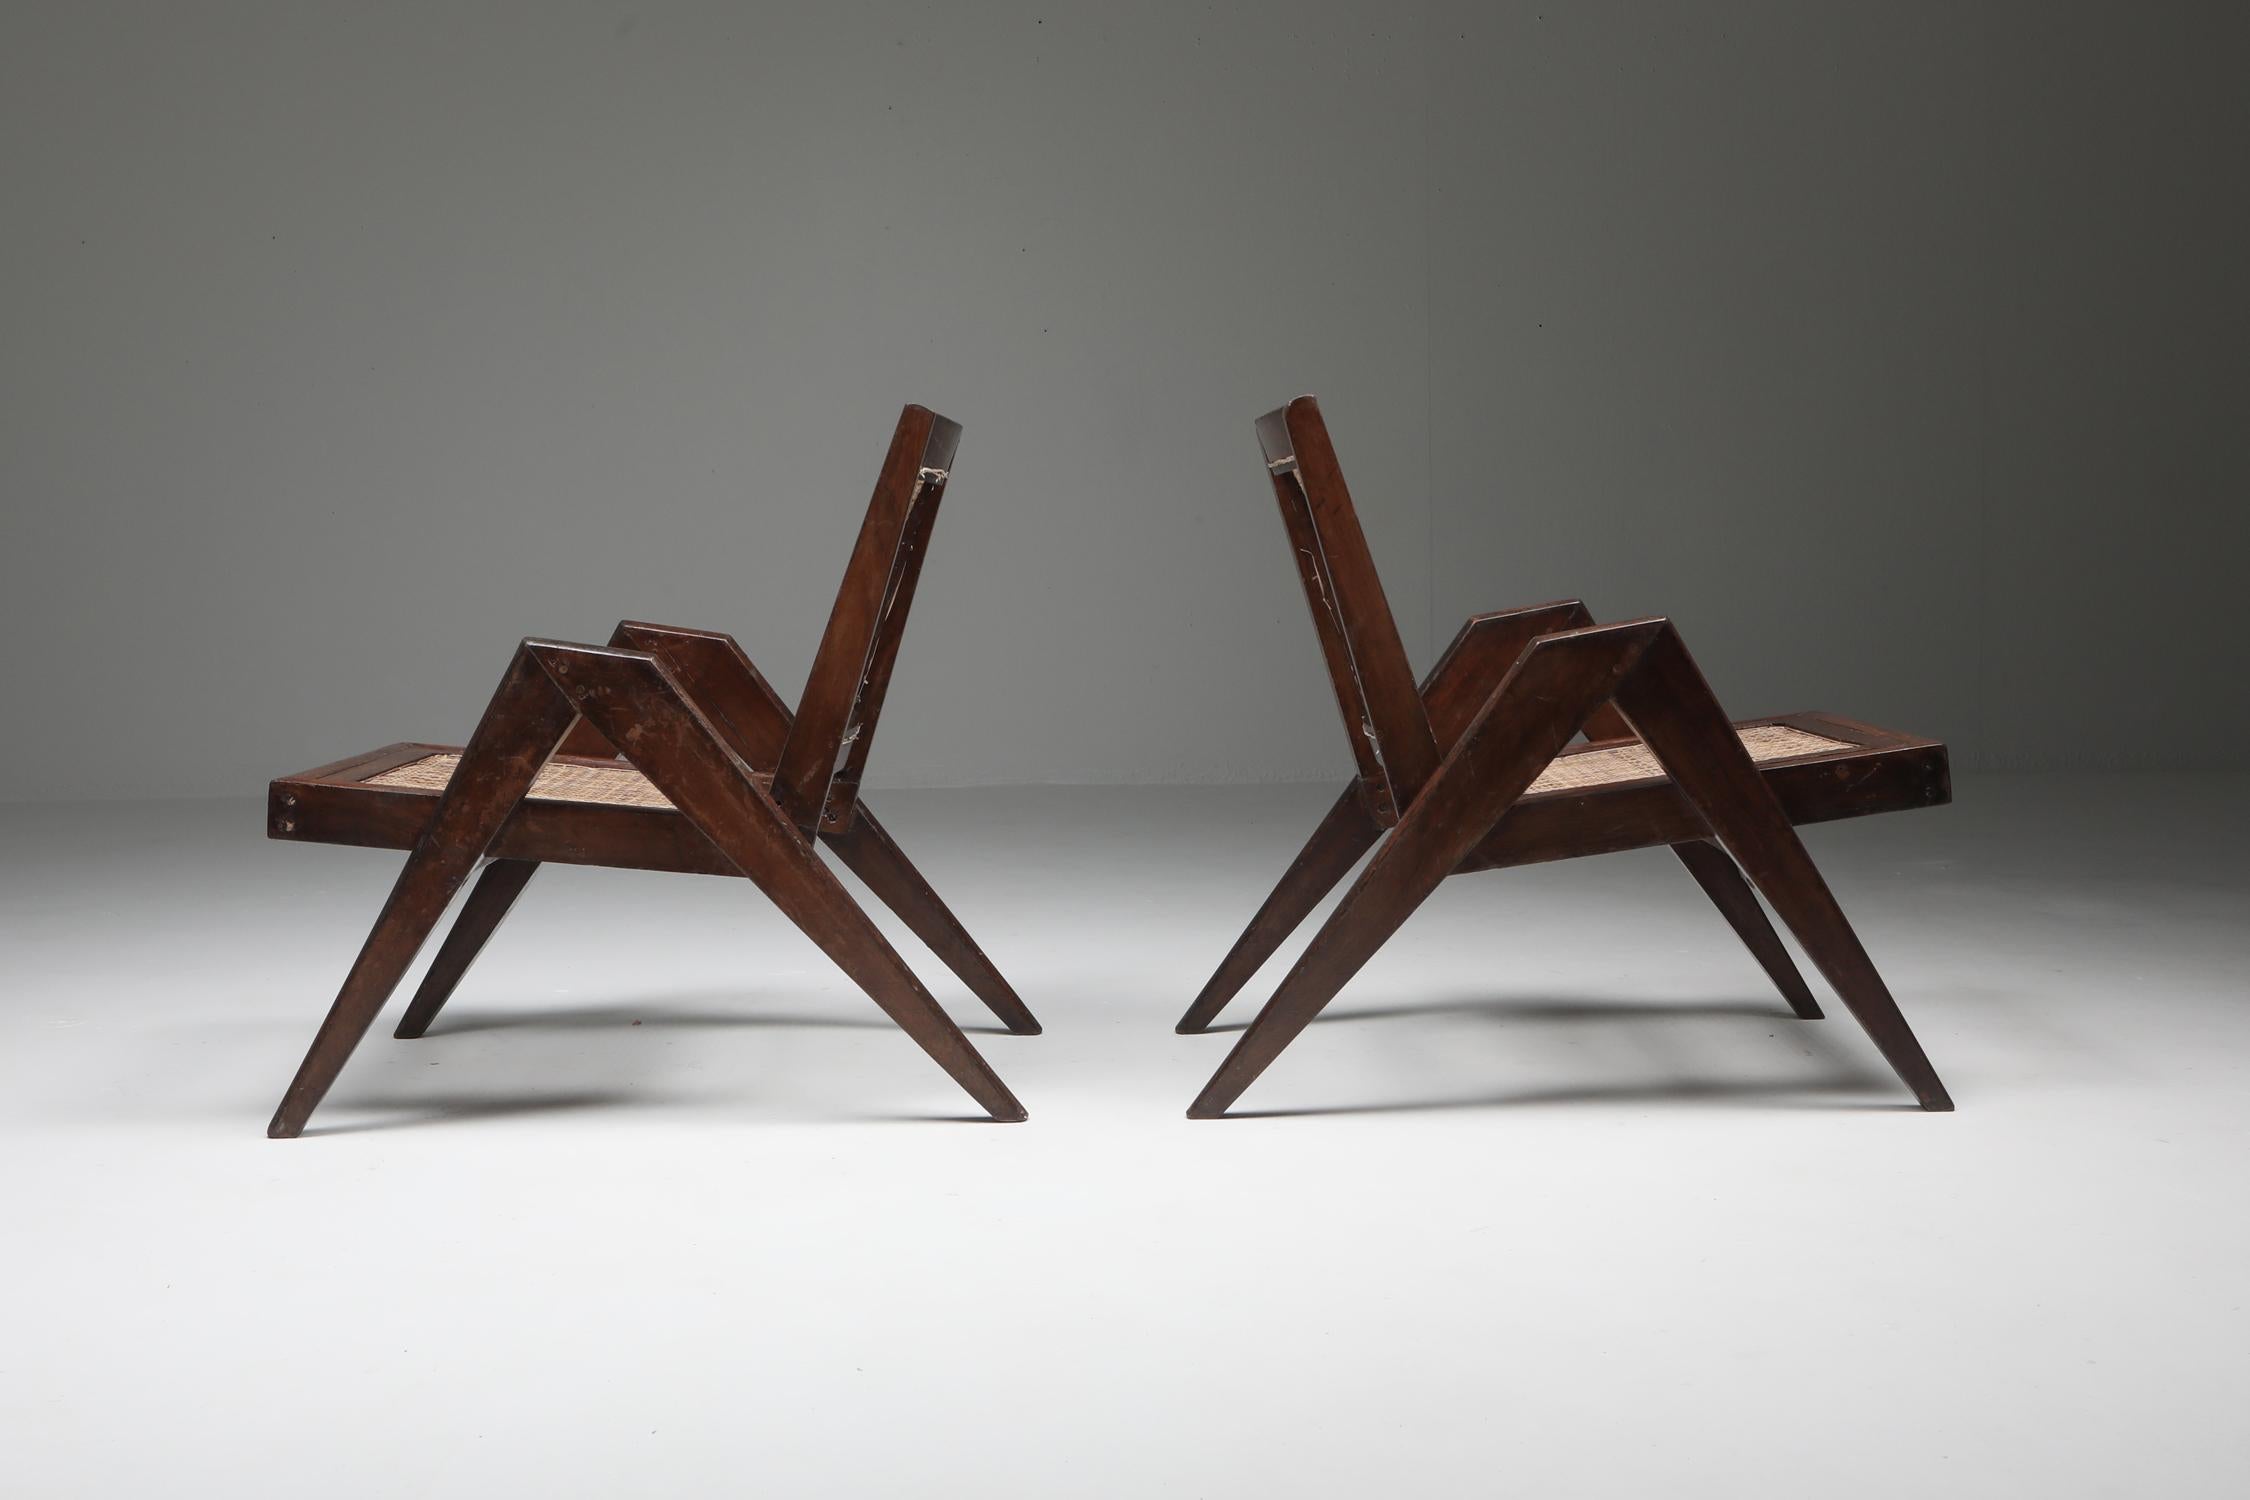 Teak low chair, a pair, Pierre Jeanneret, India 1955

Low chairs in solid teak and braided canework, Canework seat and backrest on a profiled teak structure forming a base at the back.

Designed for private residences

Another interesting and